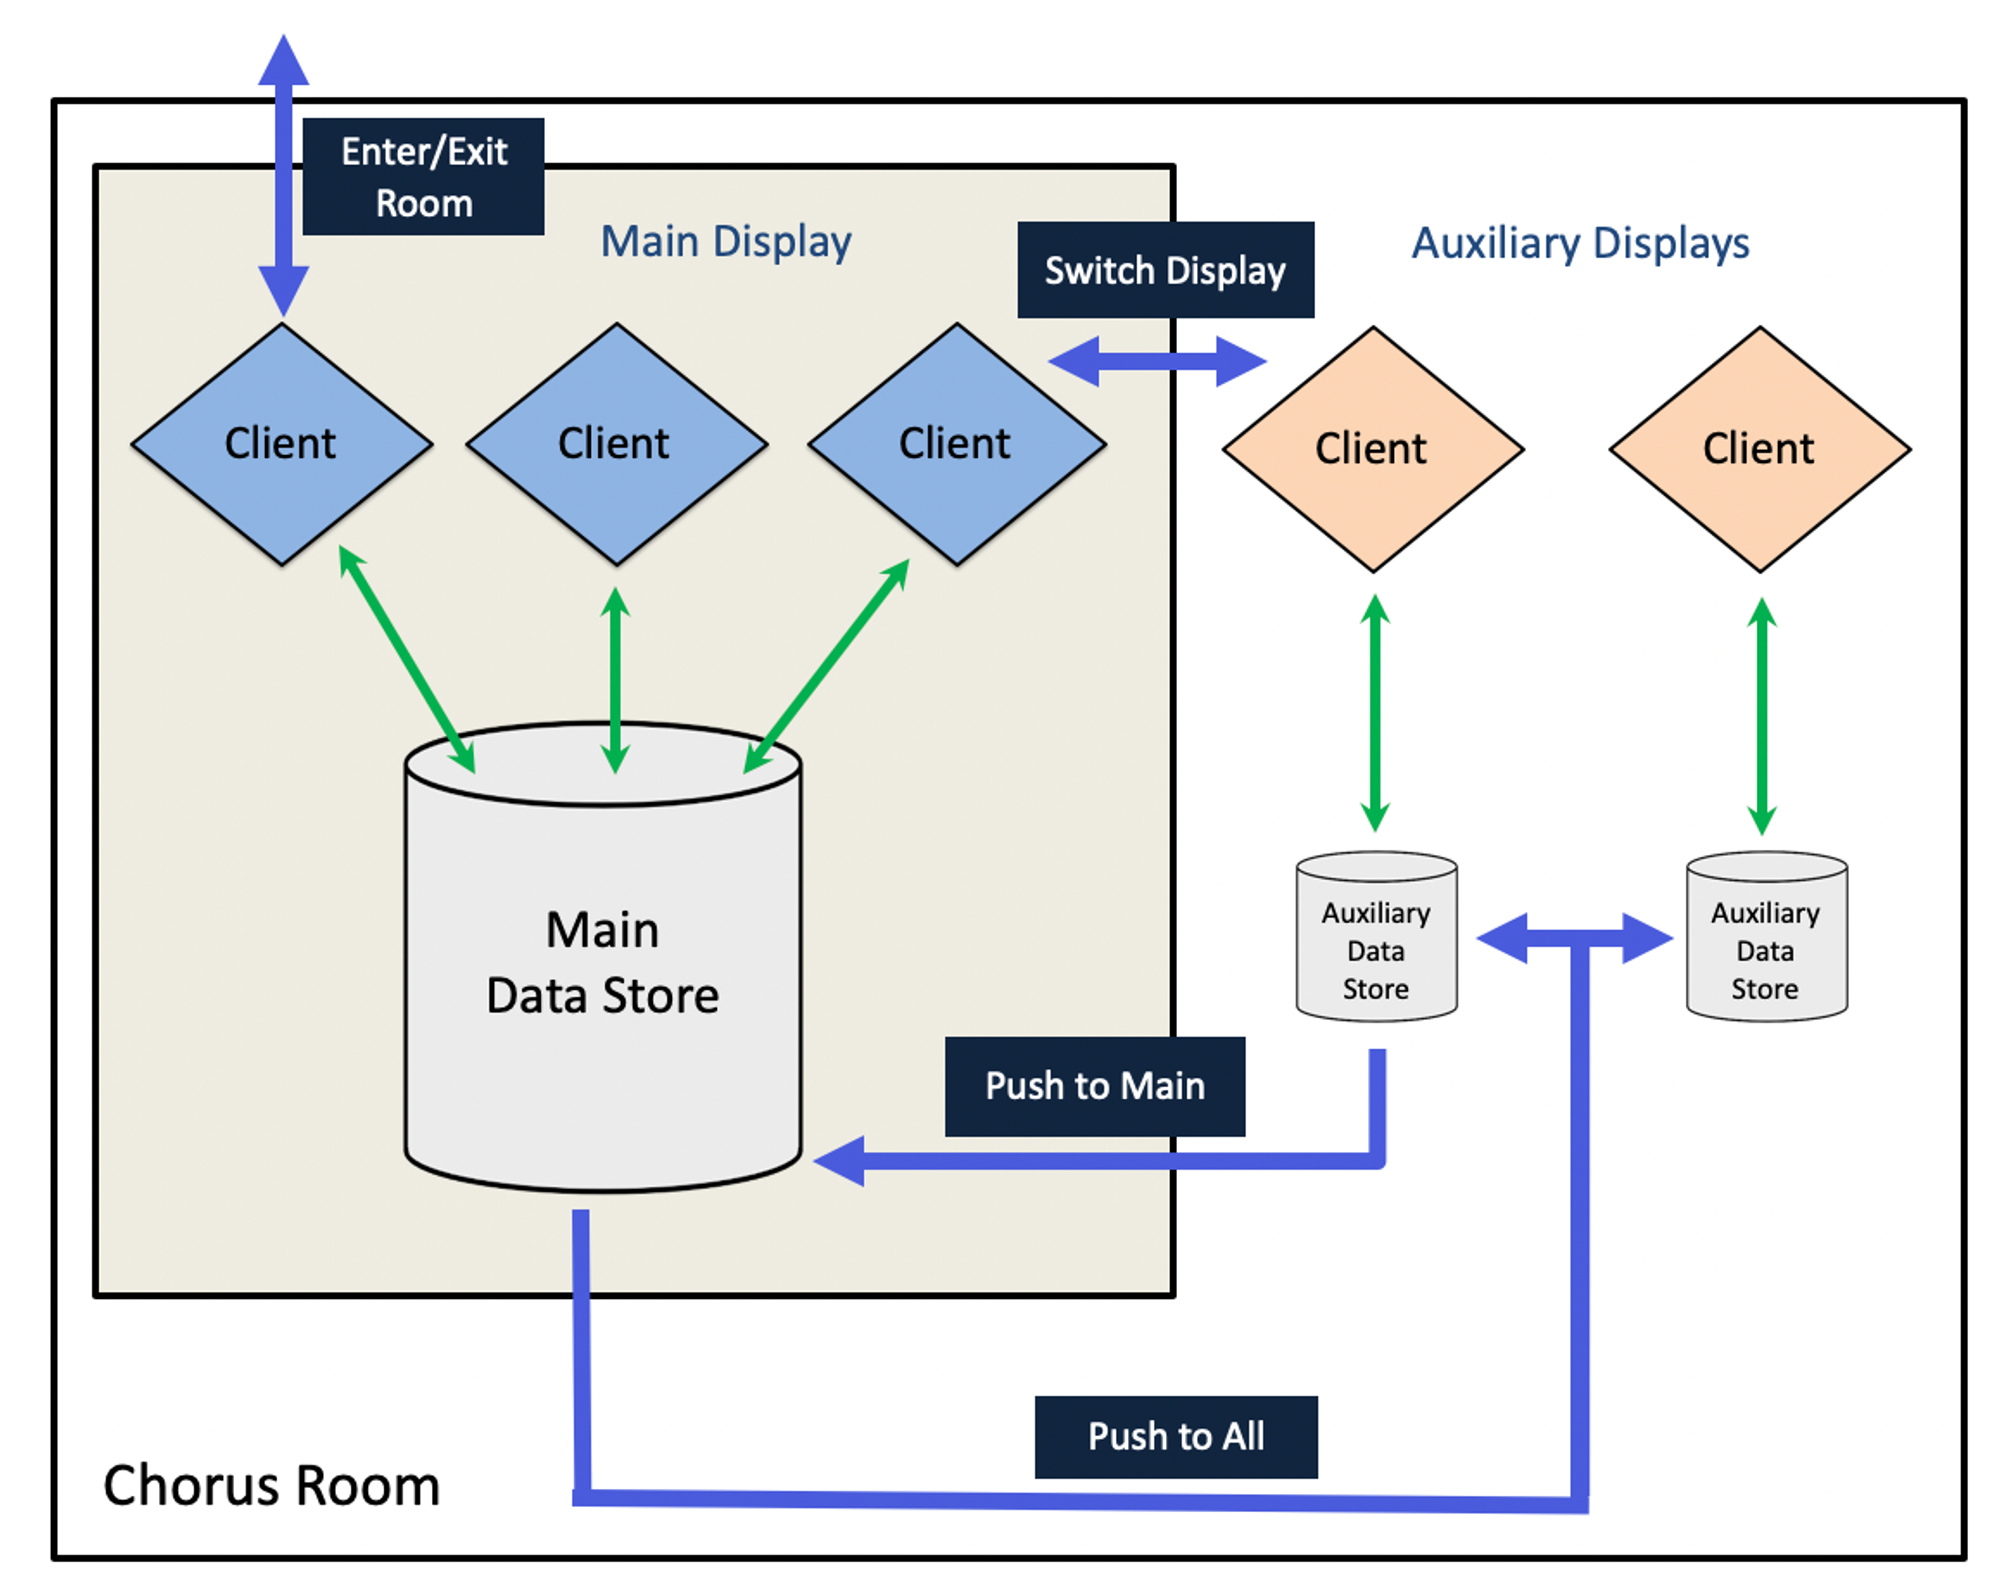 This is the Chorus model. Each Chorus room can have multiple clients and multiple data stores, but only one Main Data Store. Clients can disconnect, make updates, and then go back to the Main Data Store when desired.